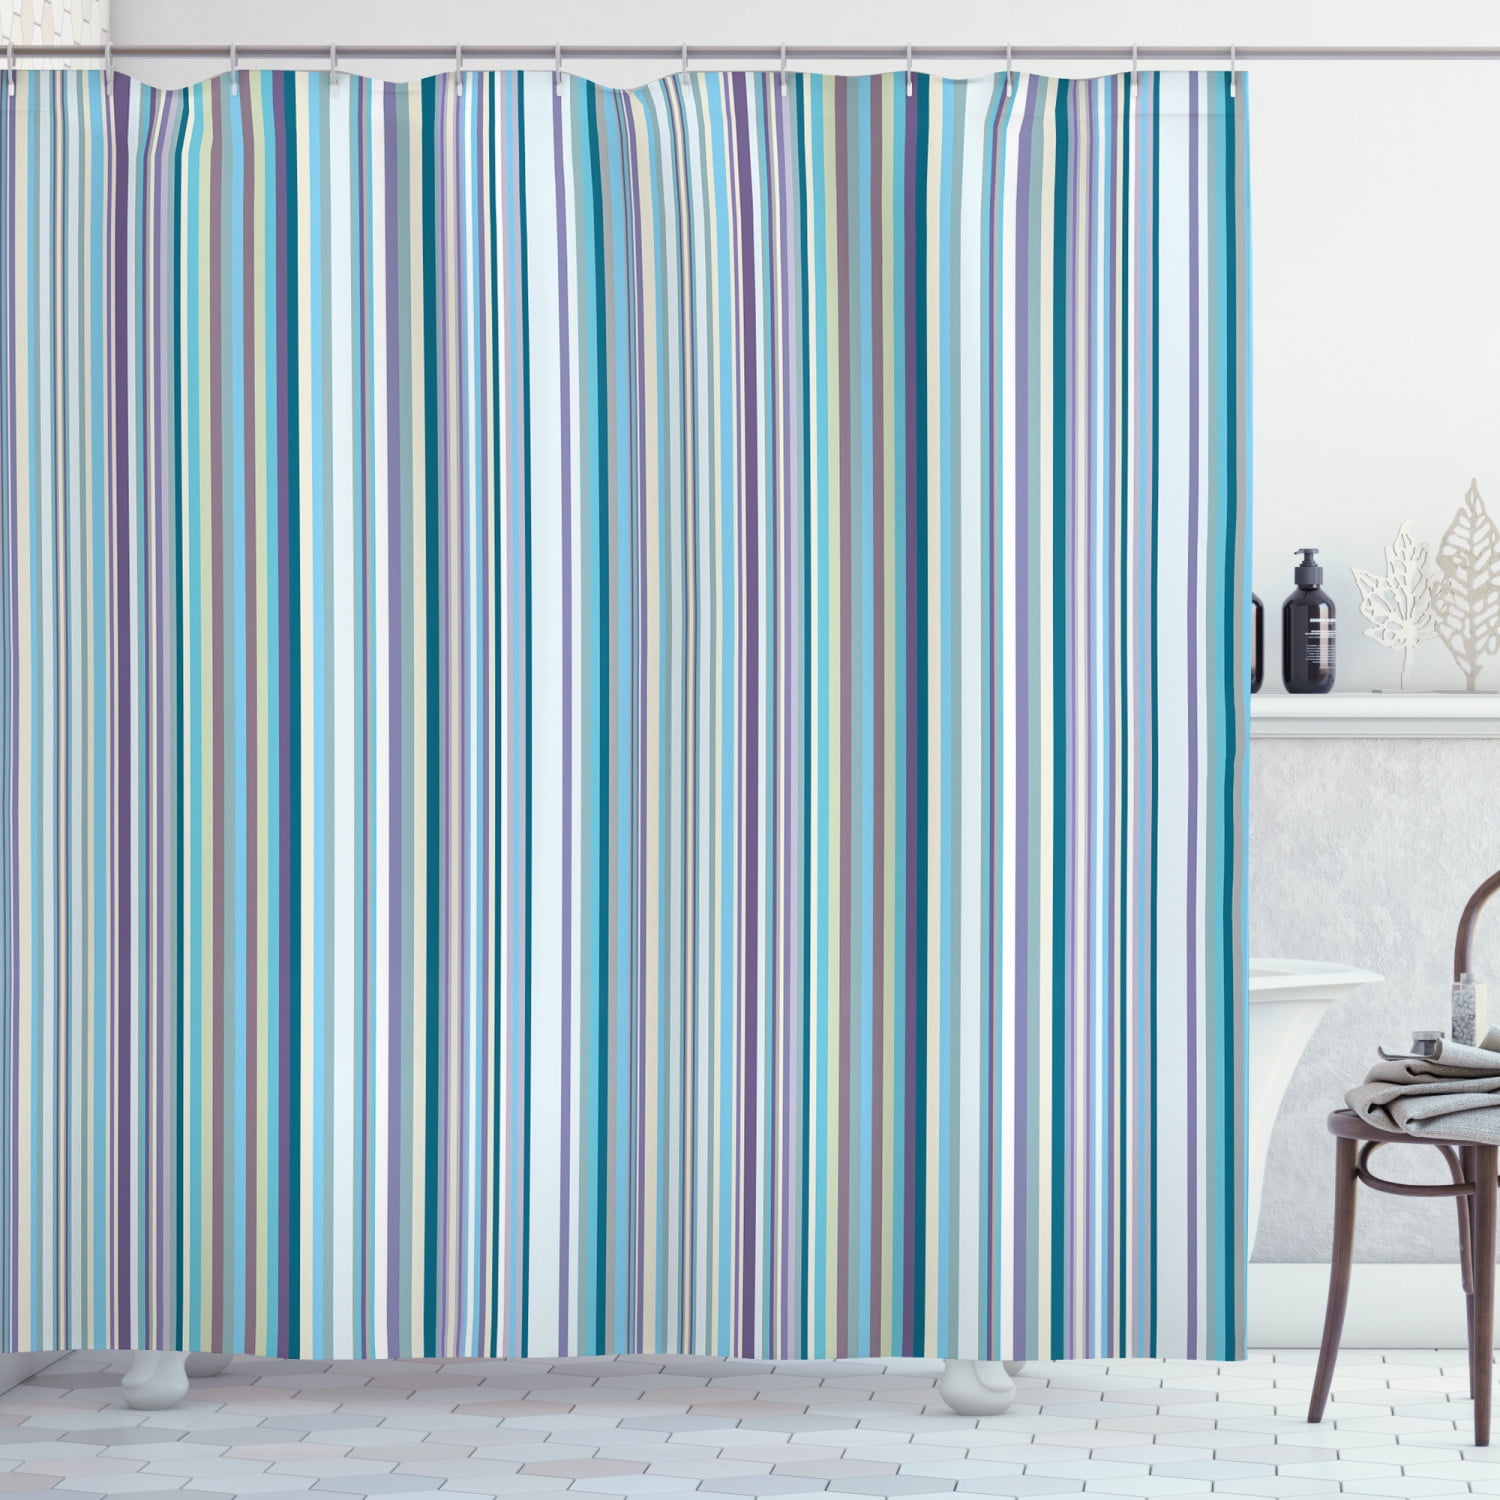 Harbour Stripe Pattern Shower Curtain Fabric Decor Set with Hooks 4 Sizes 